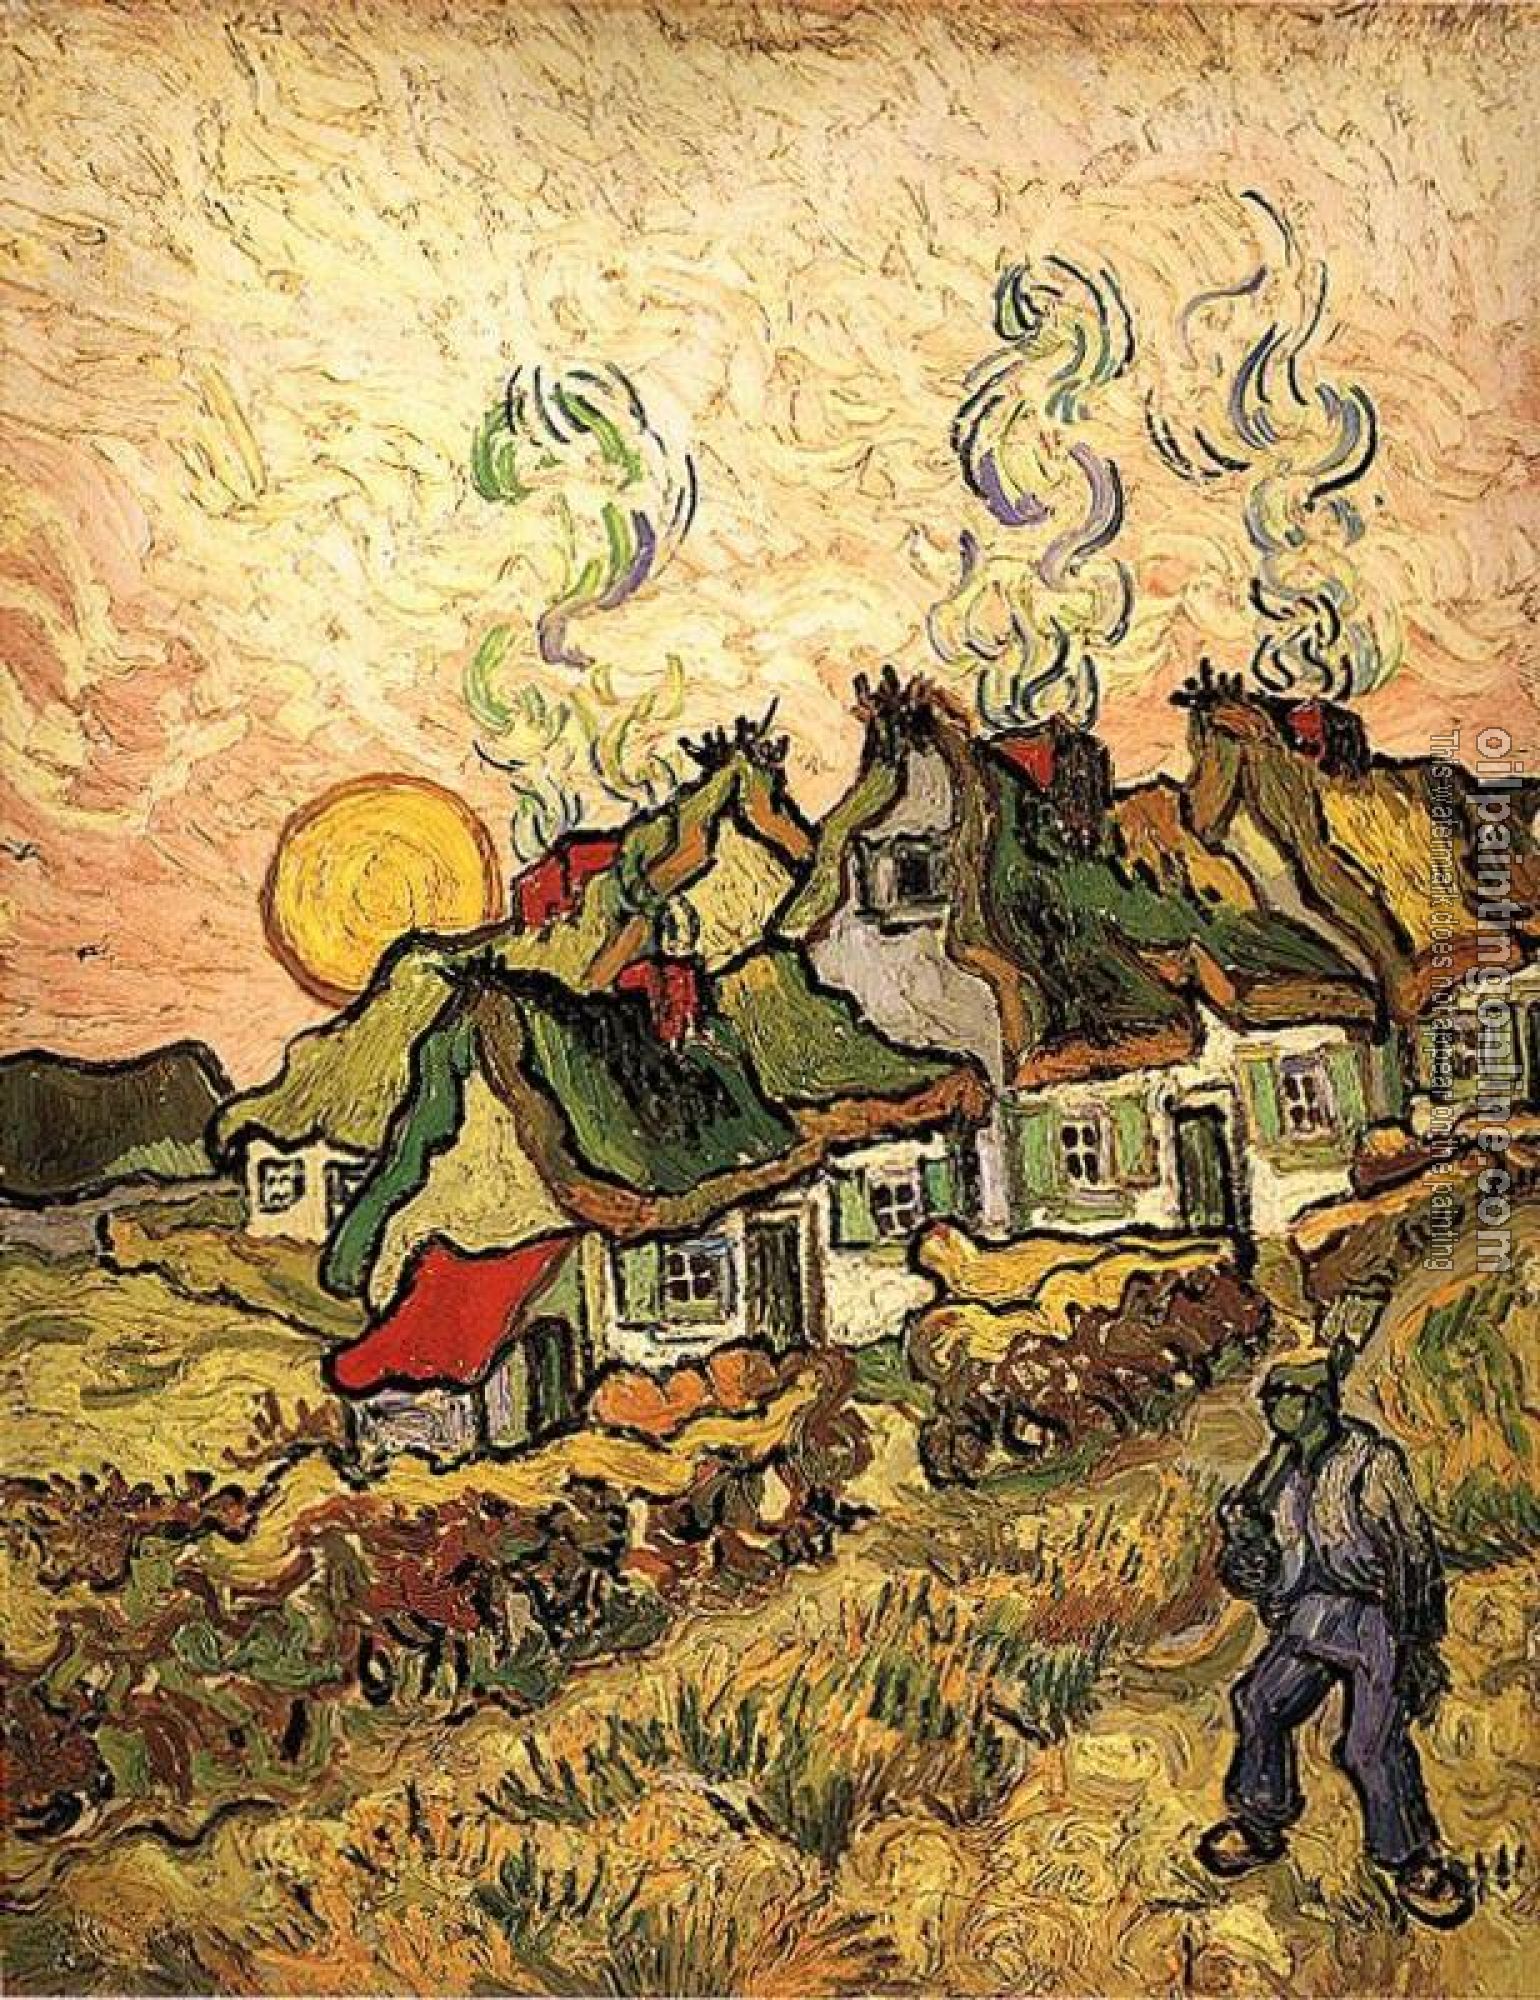 Gogh, Vincent van - Thatched Cottages in the Sunshine - Reminiscence of the Nort